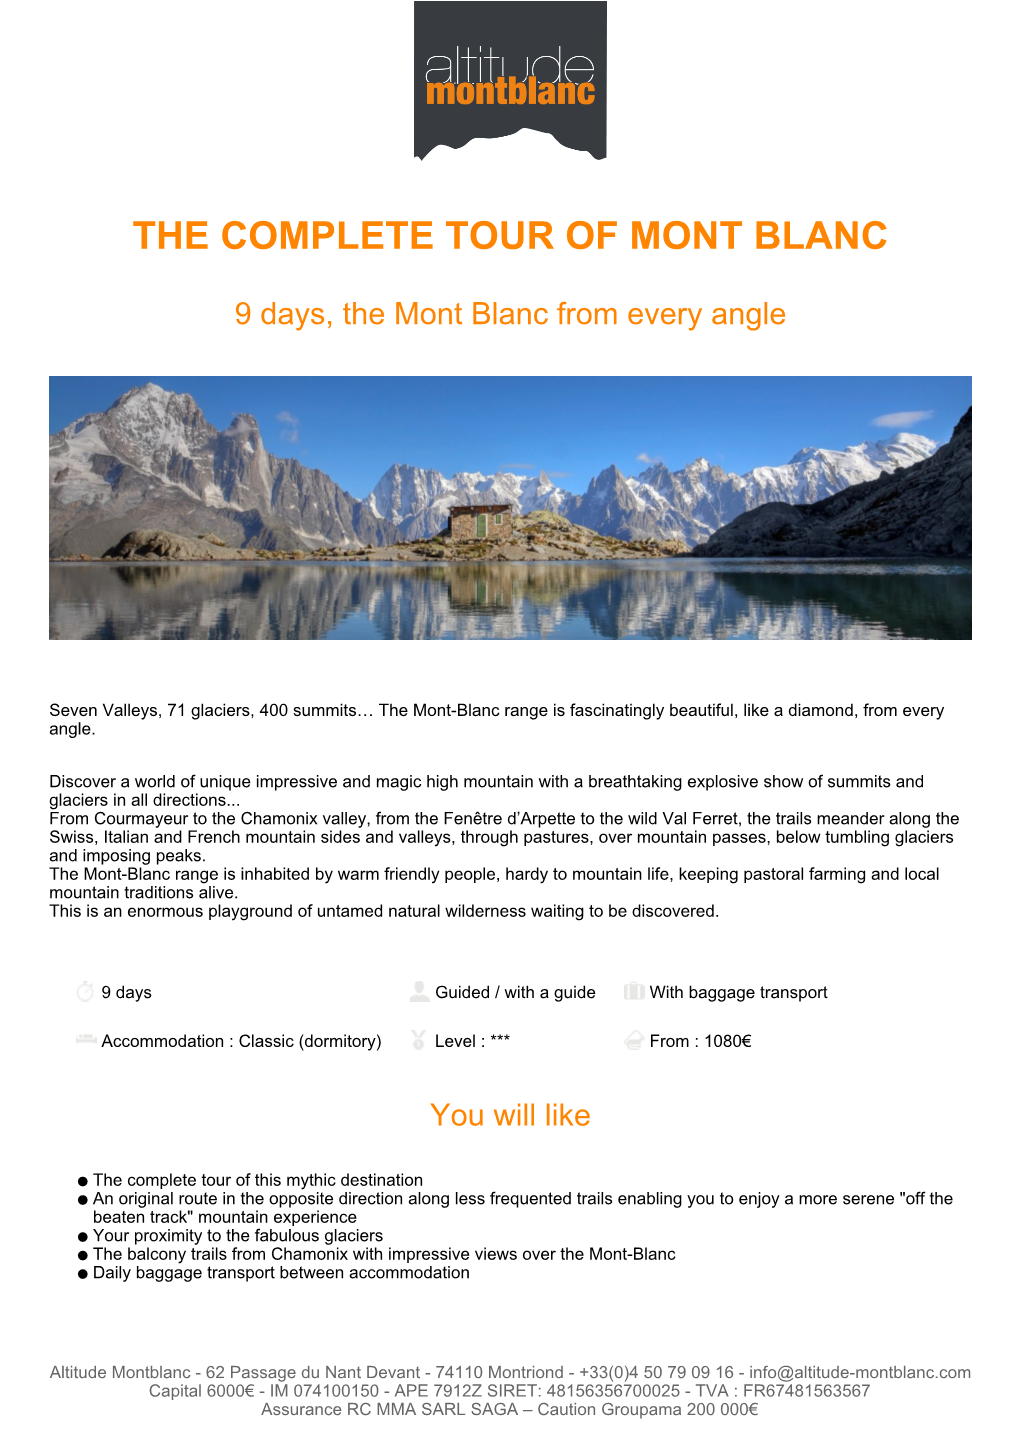 The Complete Tour of Mont Blanc